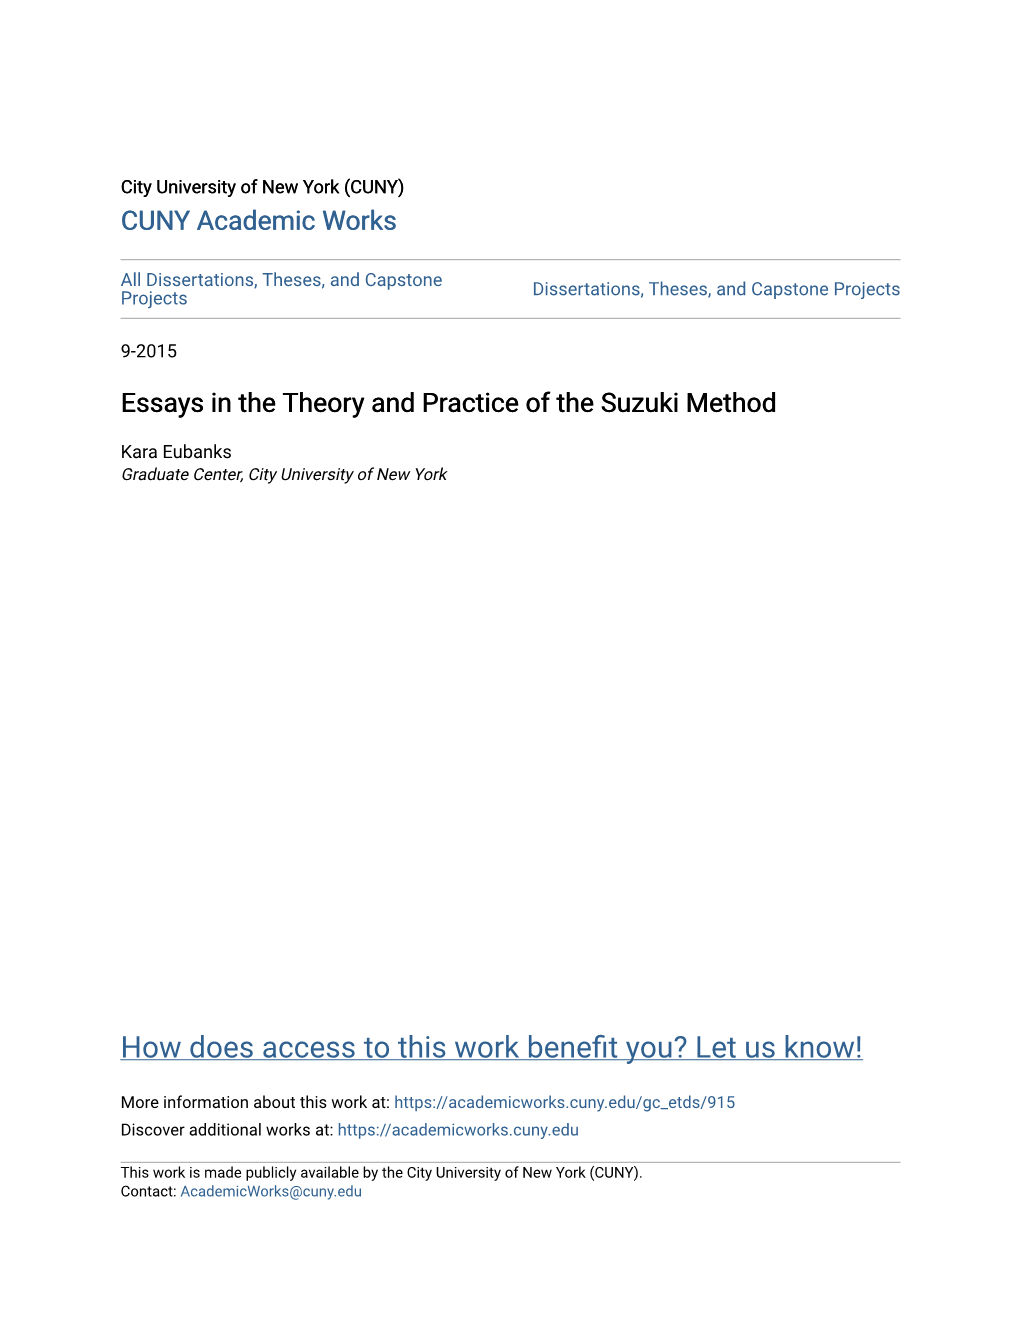 Essays in the Theory and Practice of the Suzuki Method